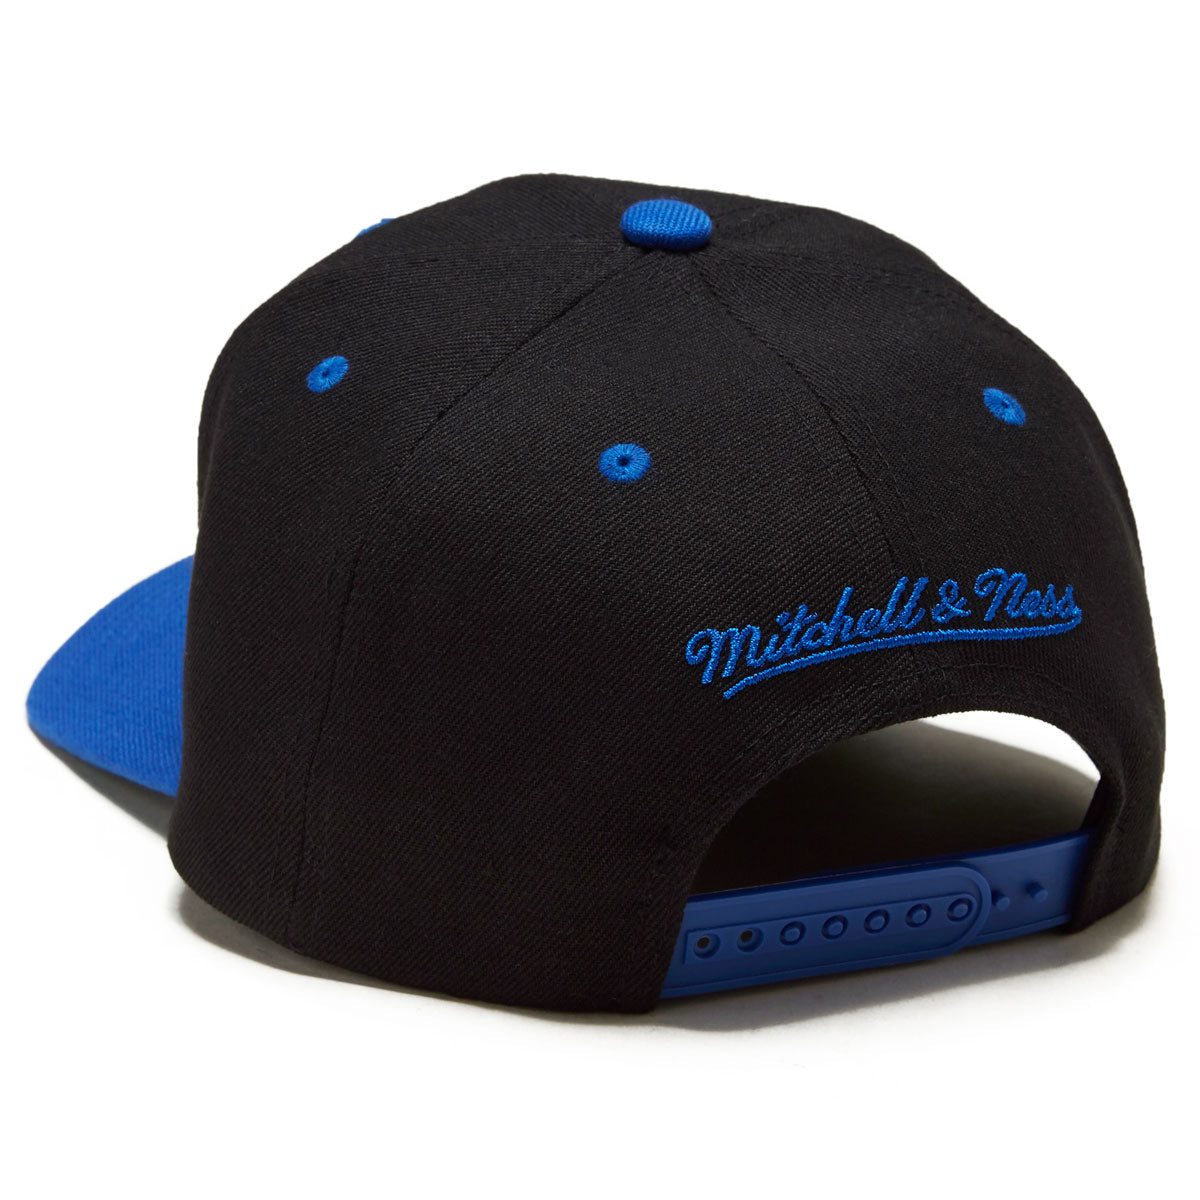 CCS x Mitchell & Ness Hoops Hat - Black/Royal image 2